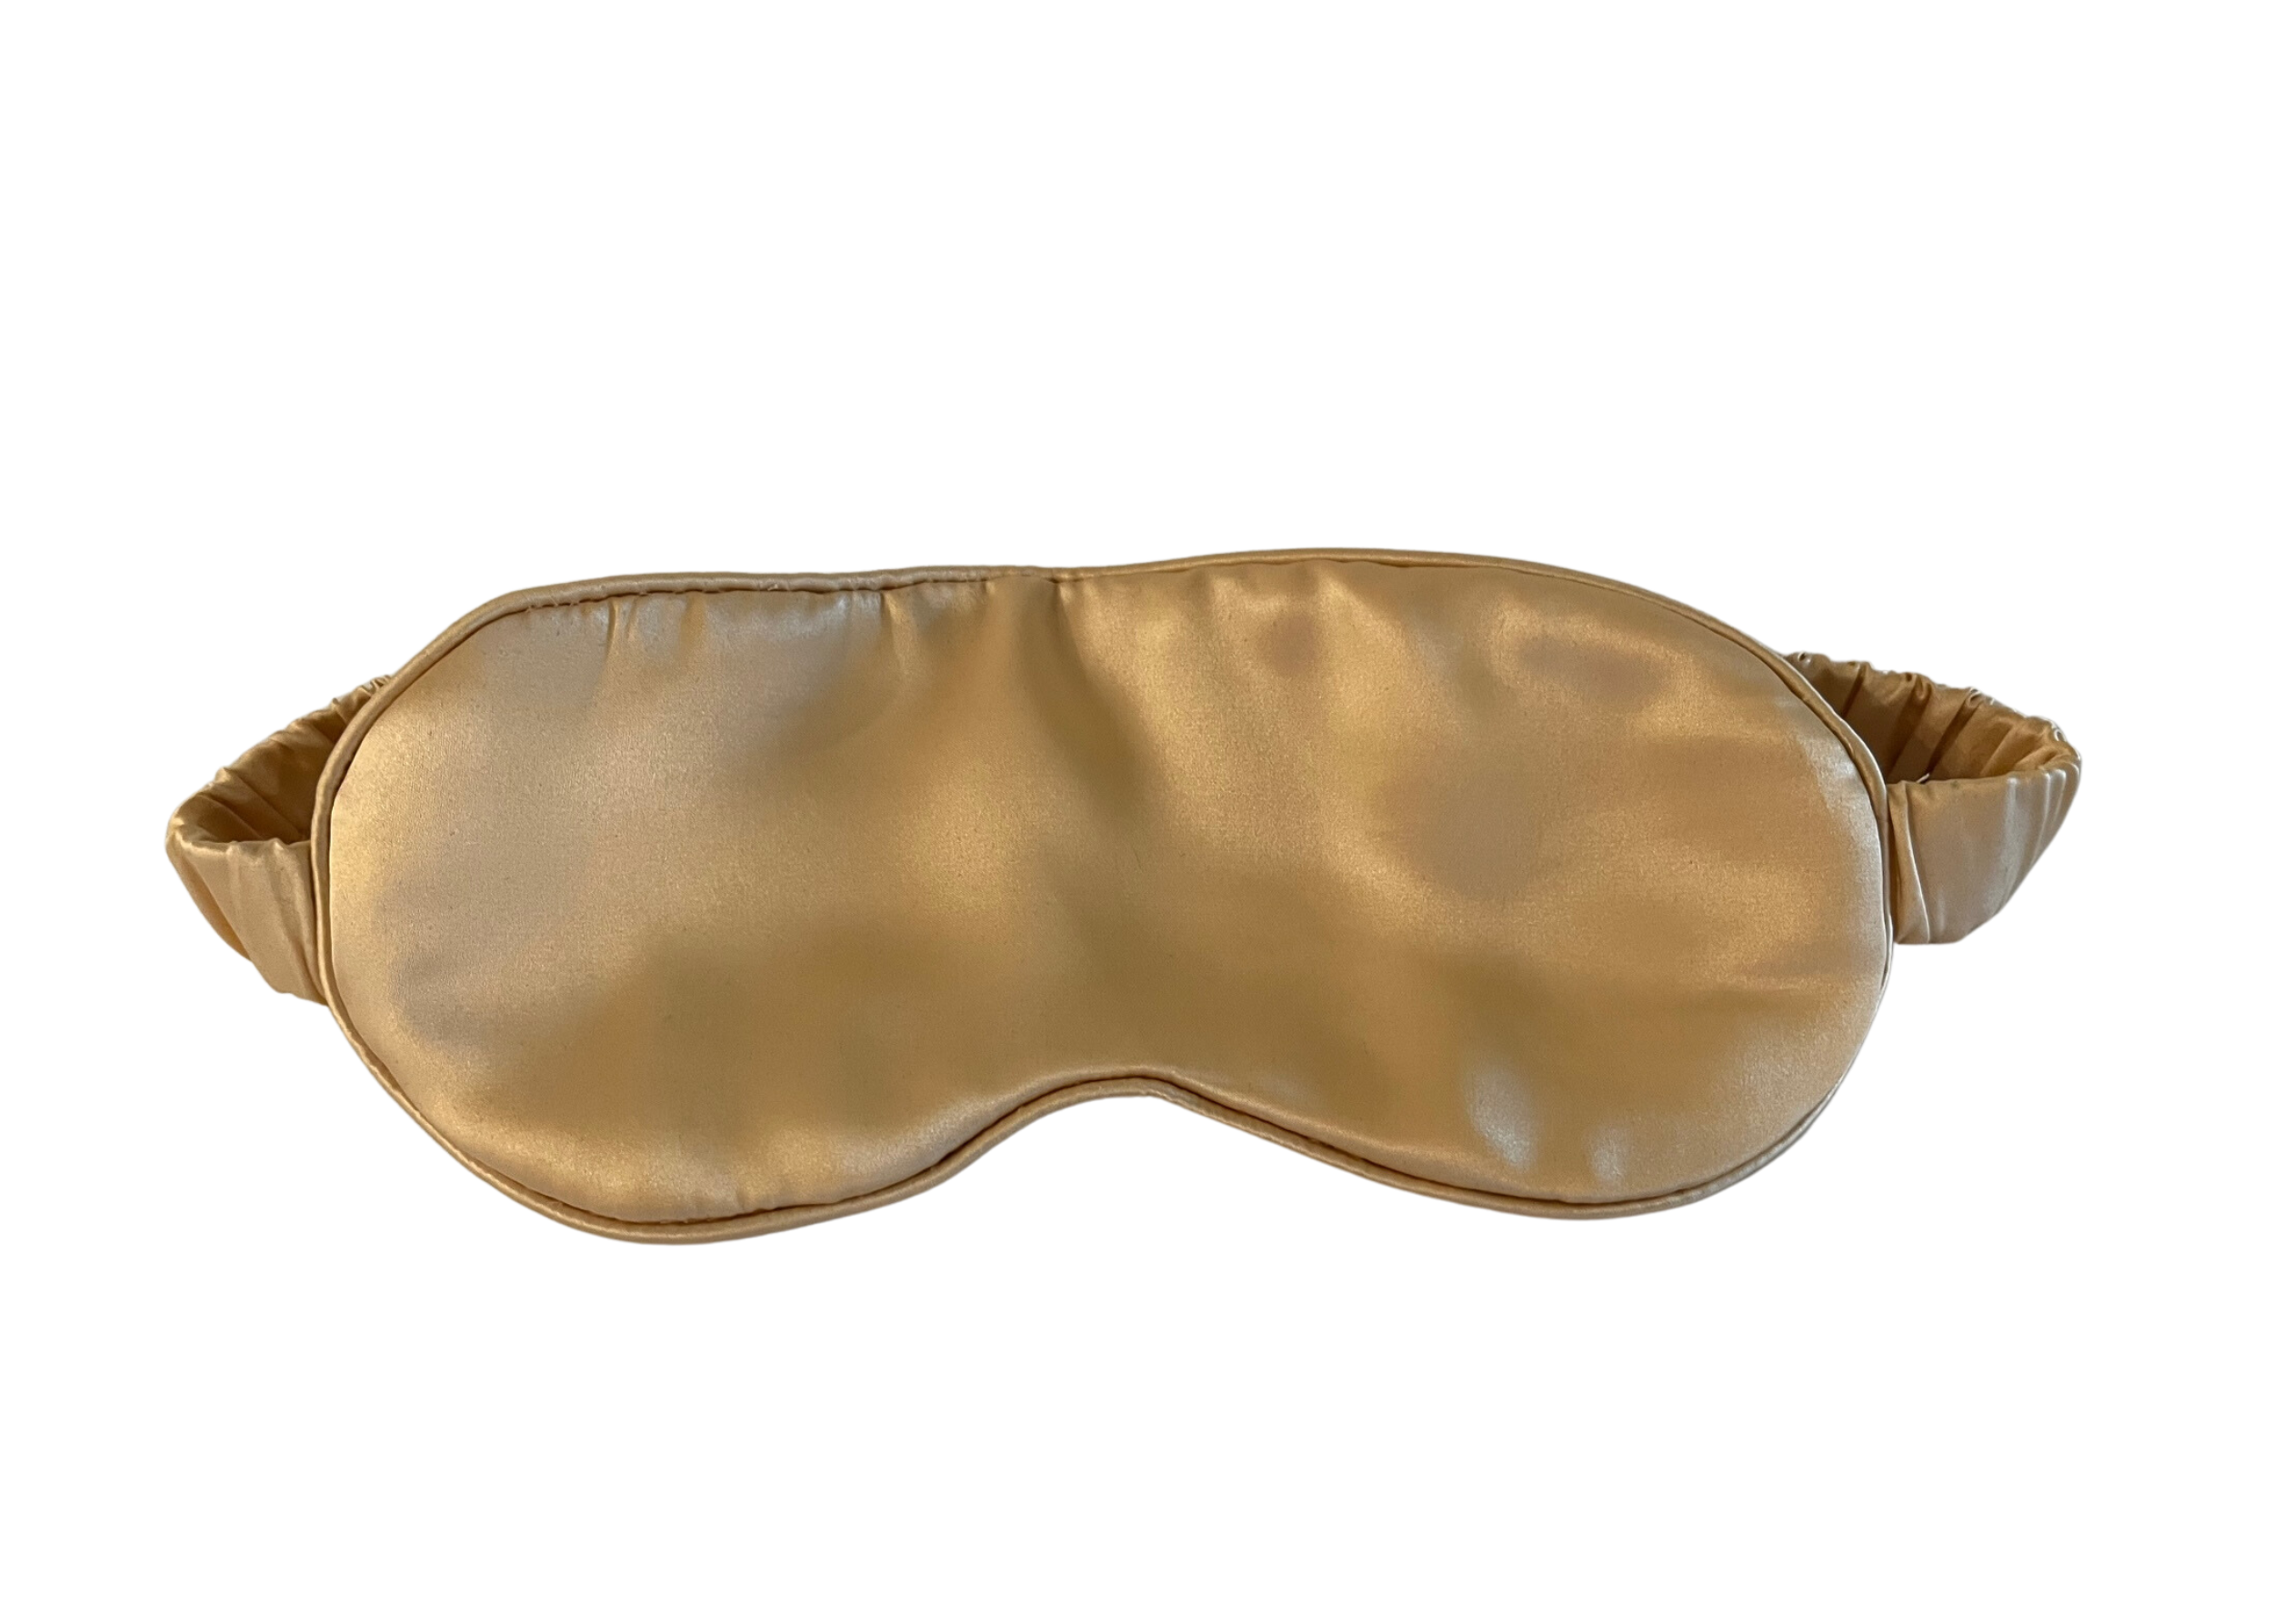  Gold Pure Silk Eye Mask - Gold Pure Silk Eye Mask -  -  - fine silk products by Forsters Finery